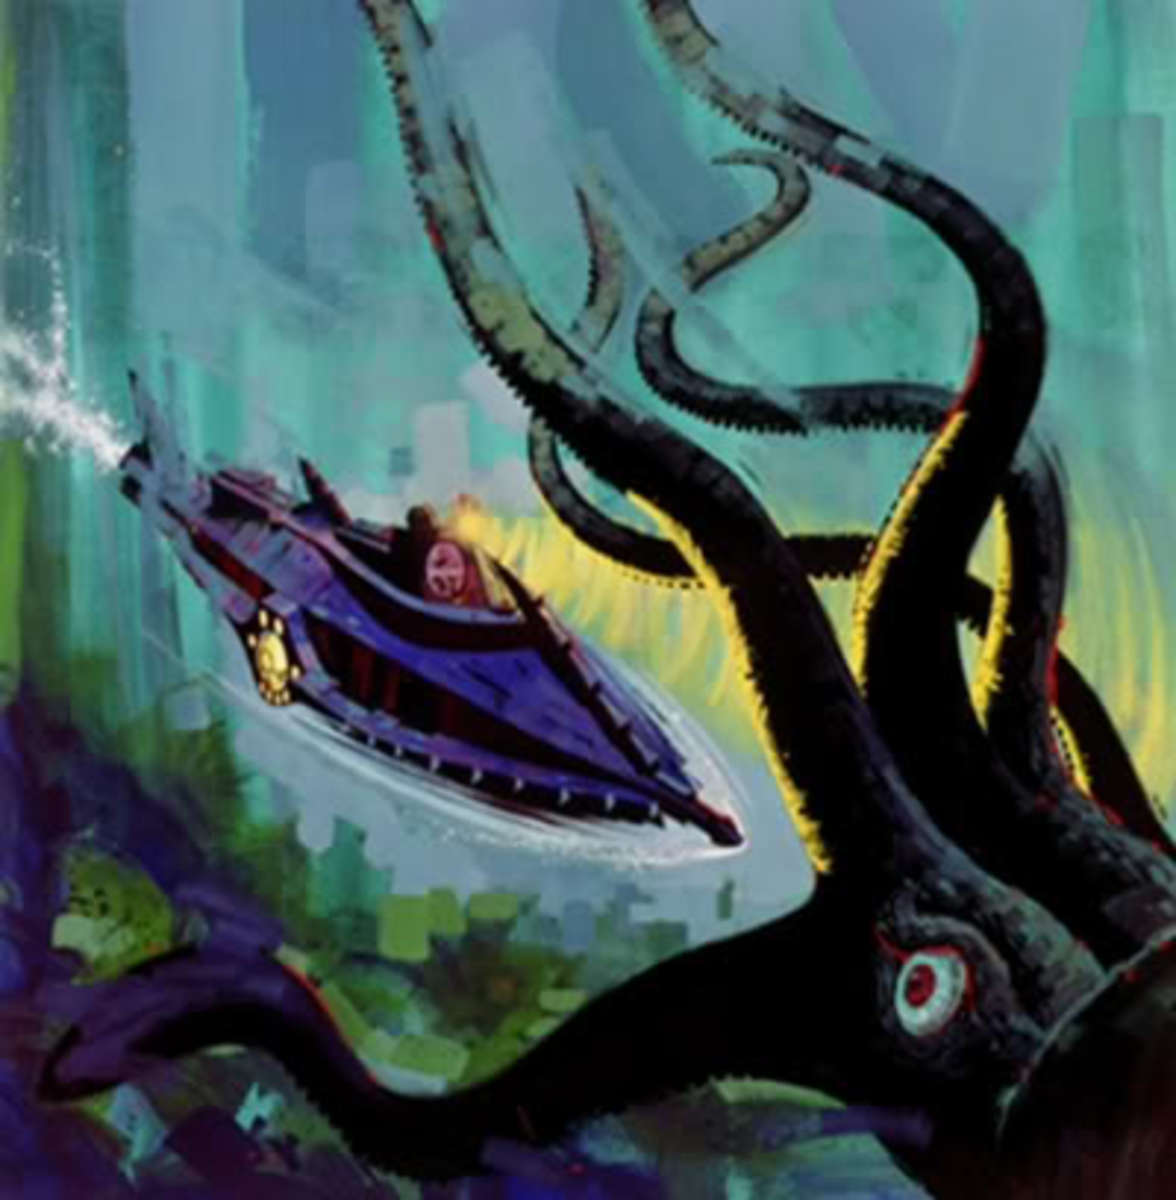 This concept art graced the cover of the Disneyland Records storyteller album for 20,000 Leagues. I remember being regularly terrified by this image as I went through my collection of Disney LPs.